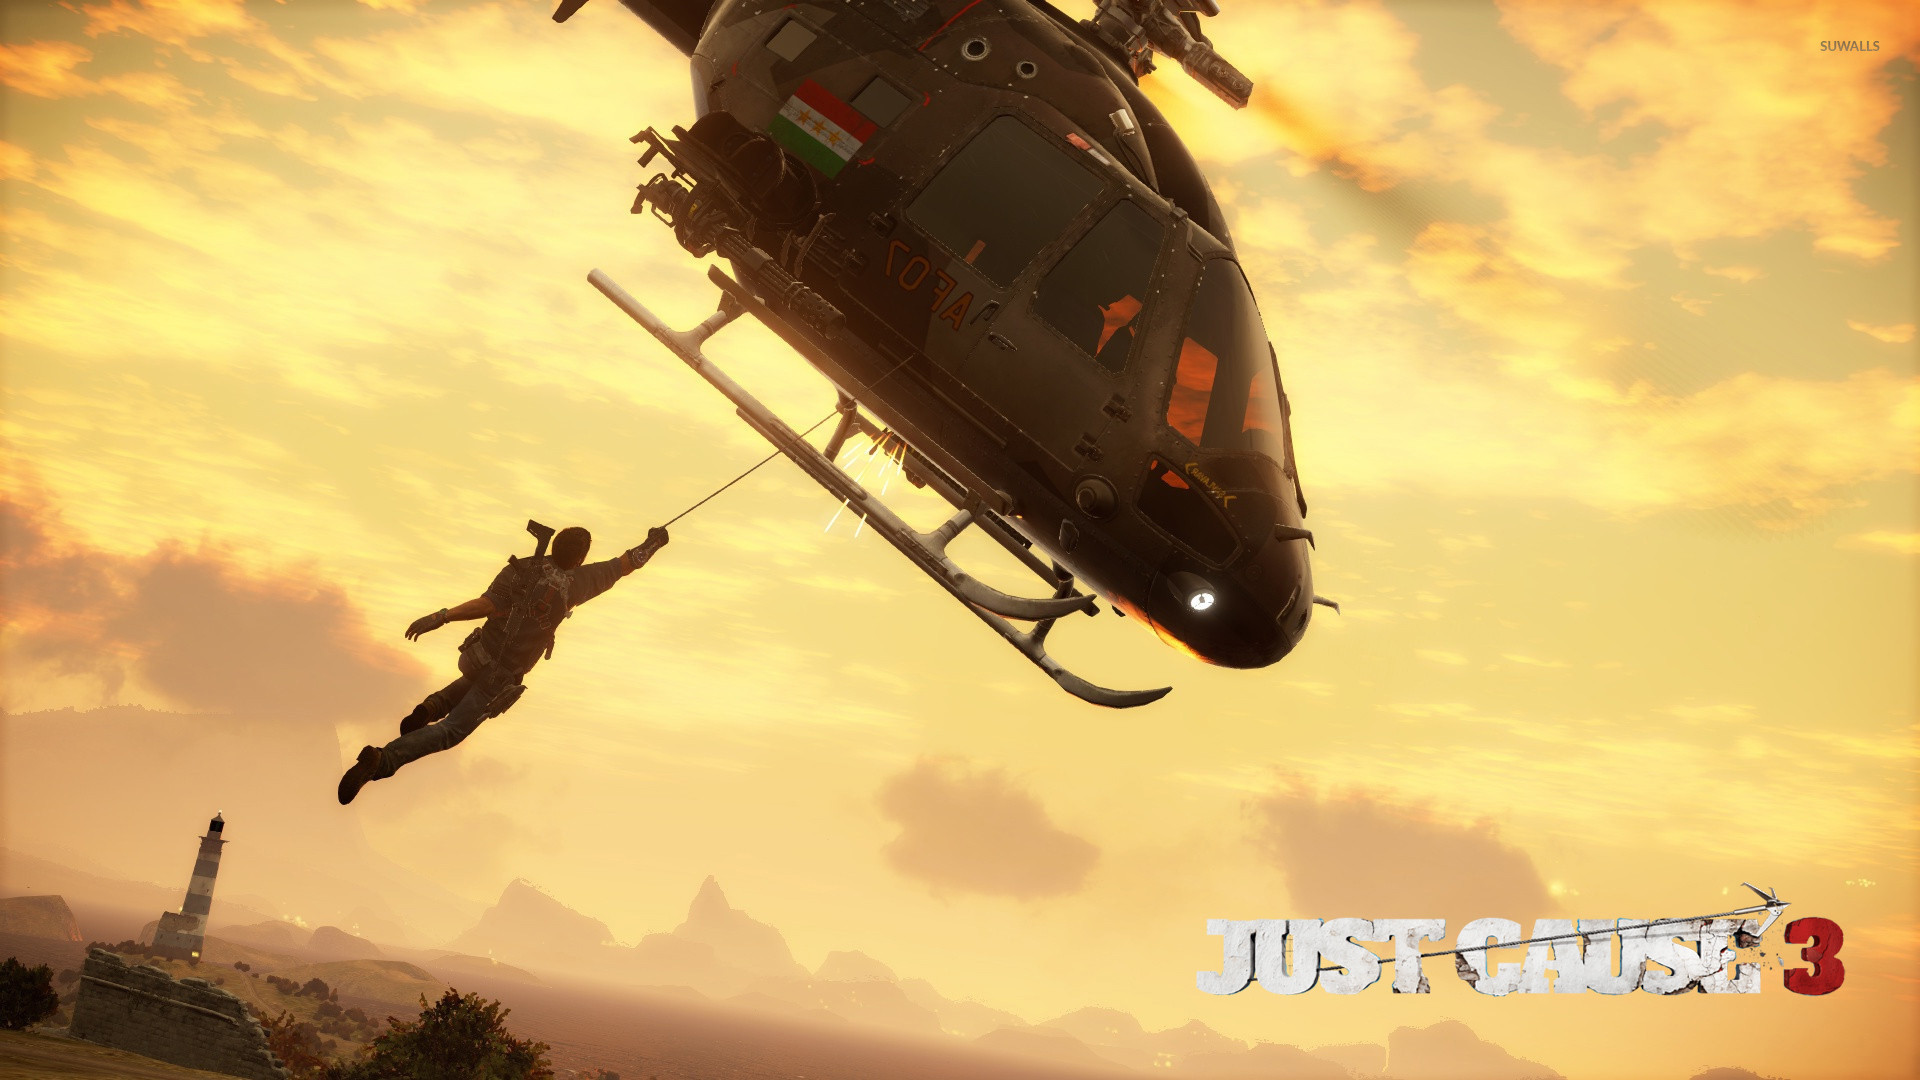 1920x1080 Rico Rodriguez hanging from a helicopter - Just Cause 3 wallpaper